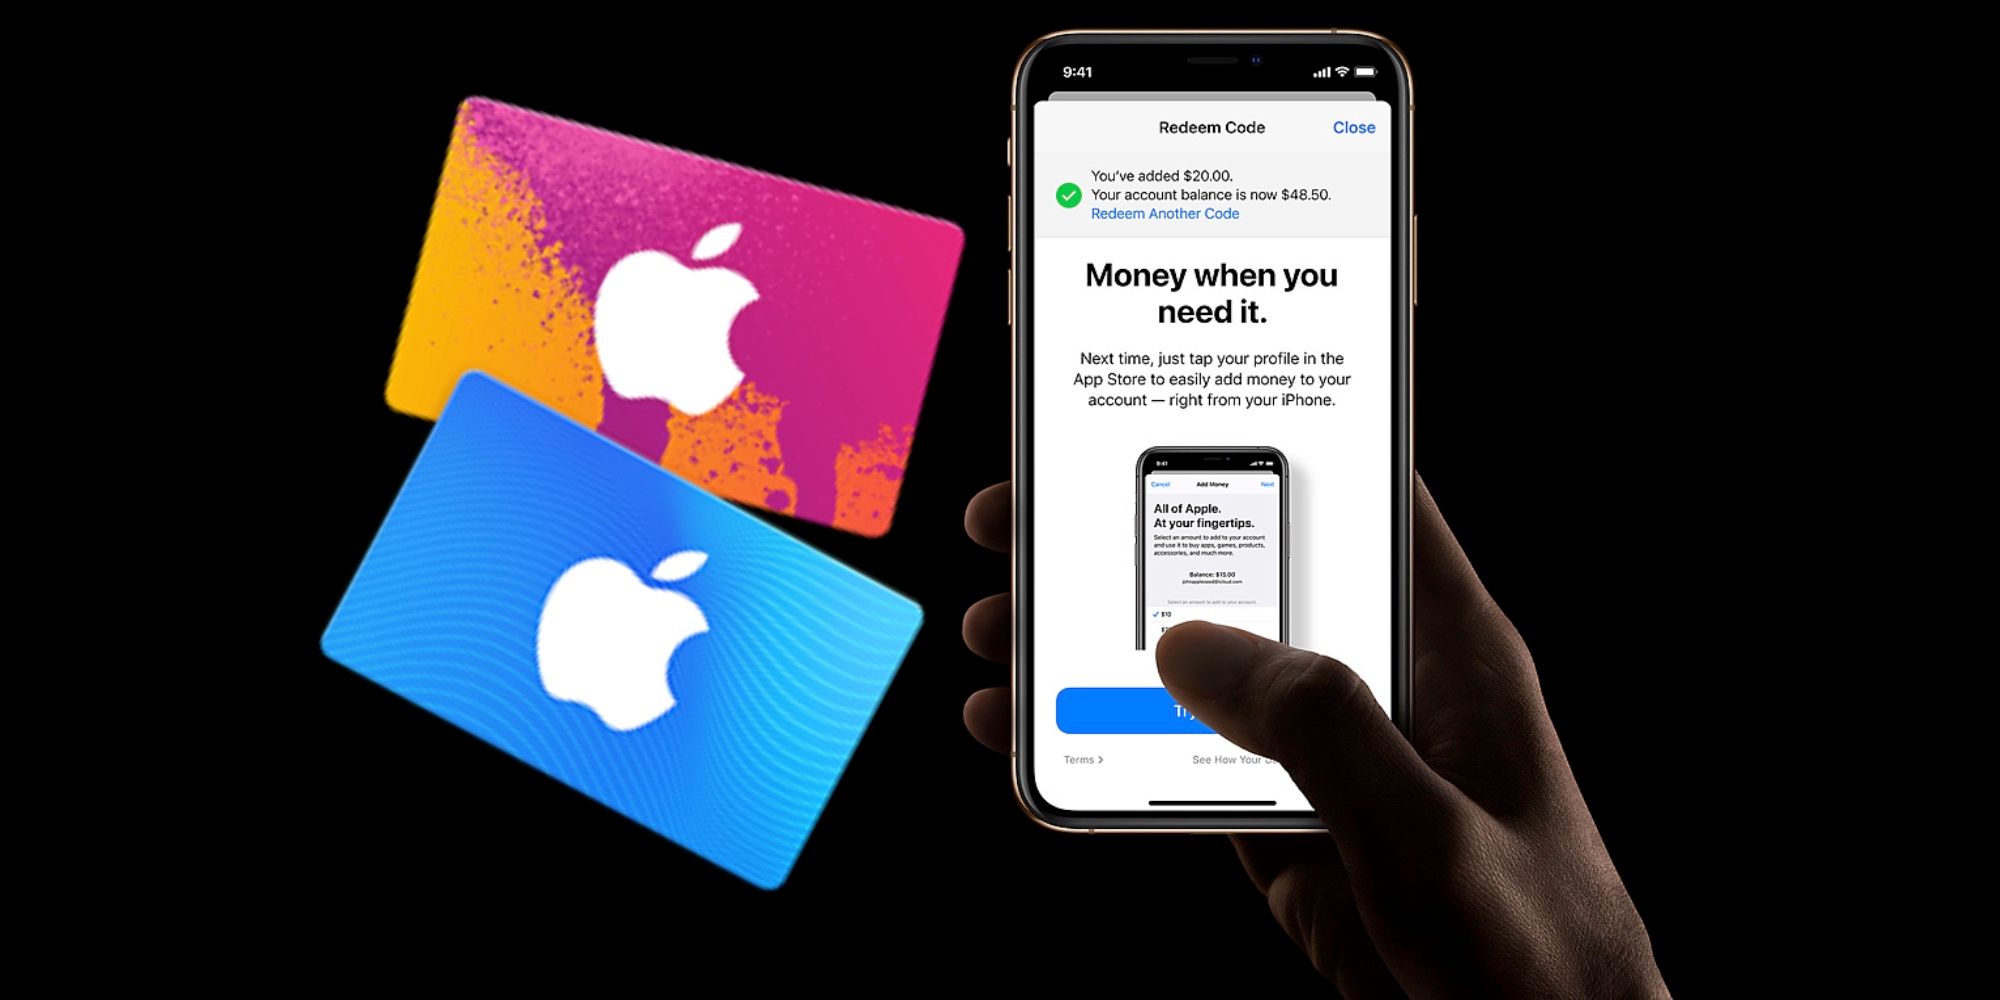 5 things you can do with an Apple gift card - AbokiTrade Blog